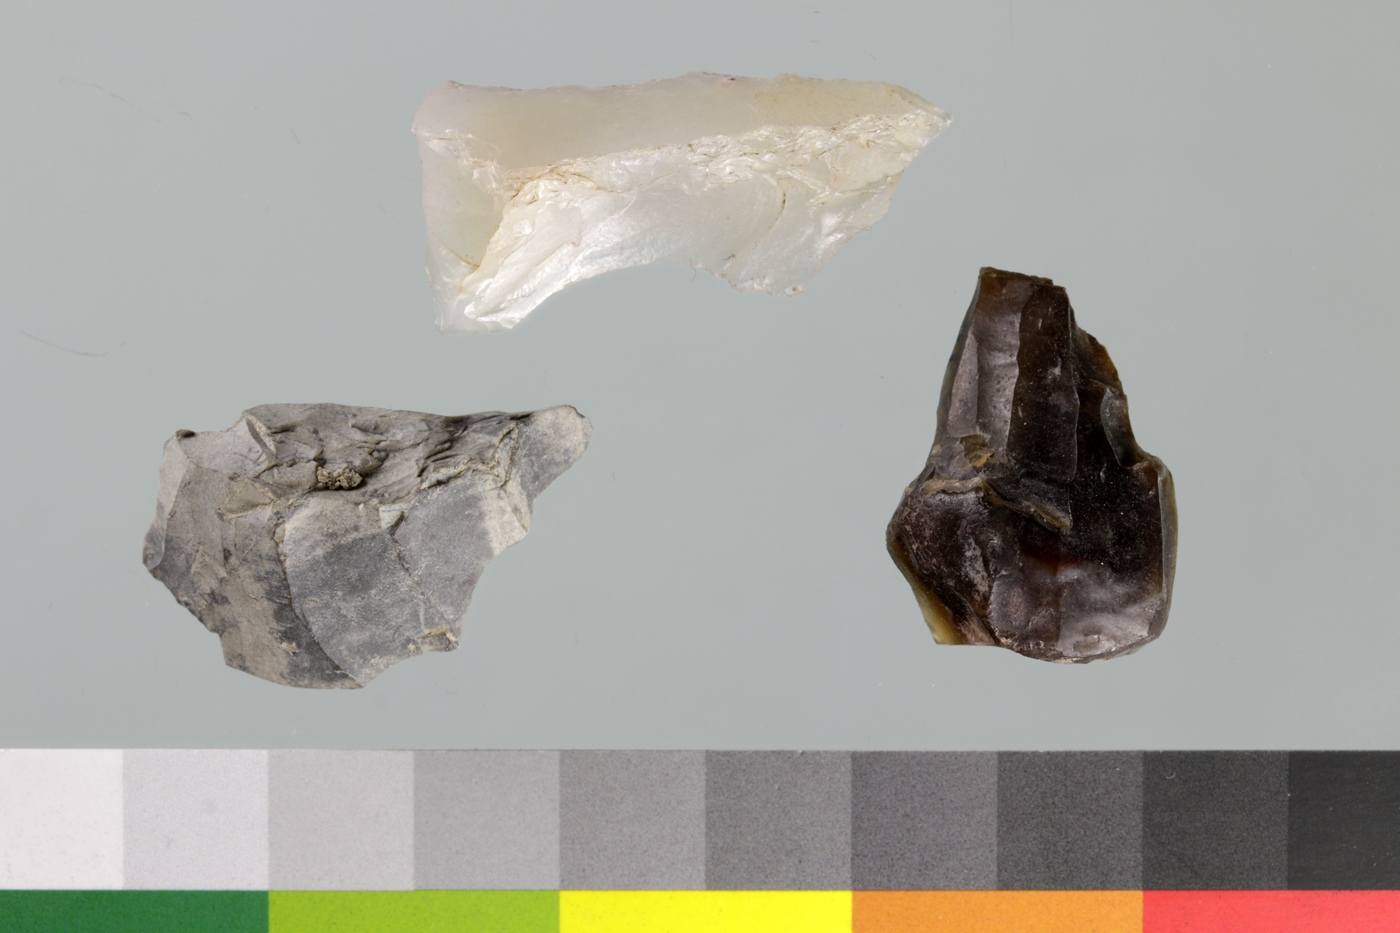 Rejuvenation flakes of different raw materials. They testify to the reduction of chert and chalcedony at Monjukli Depe.